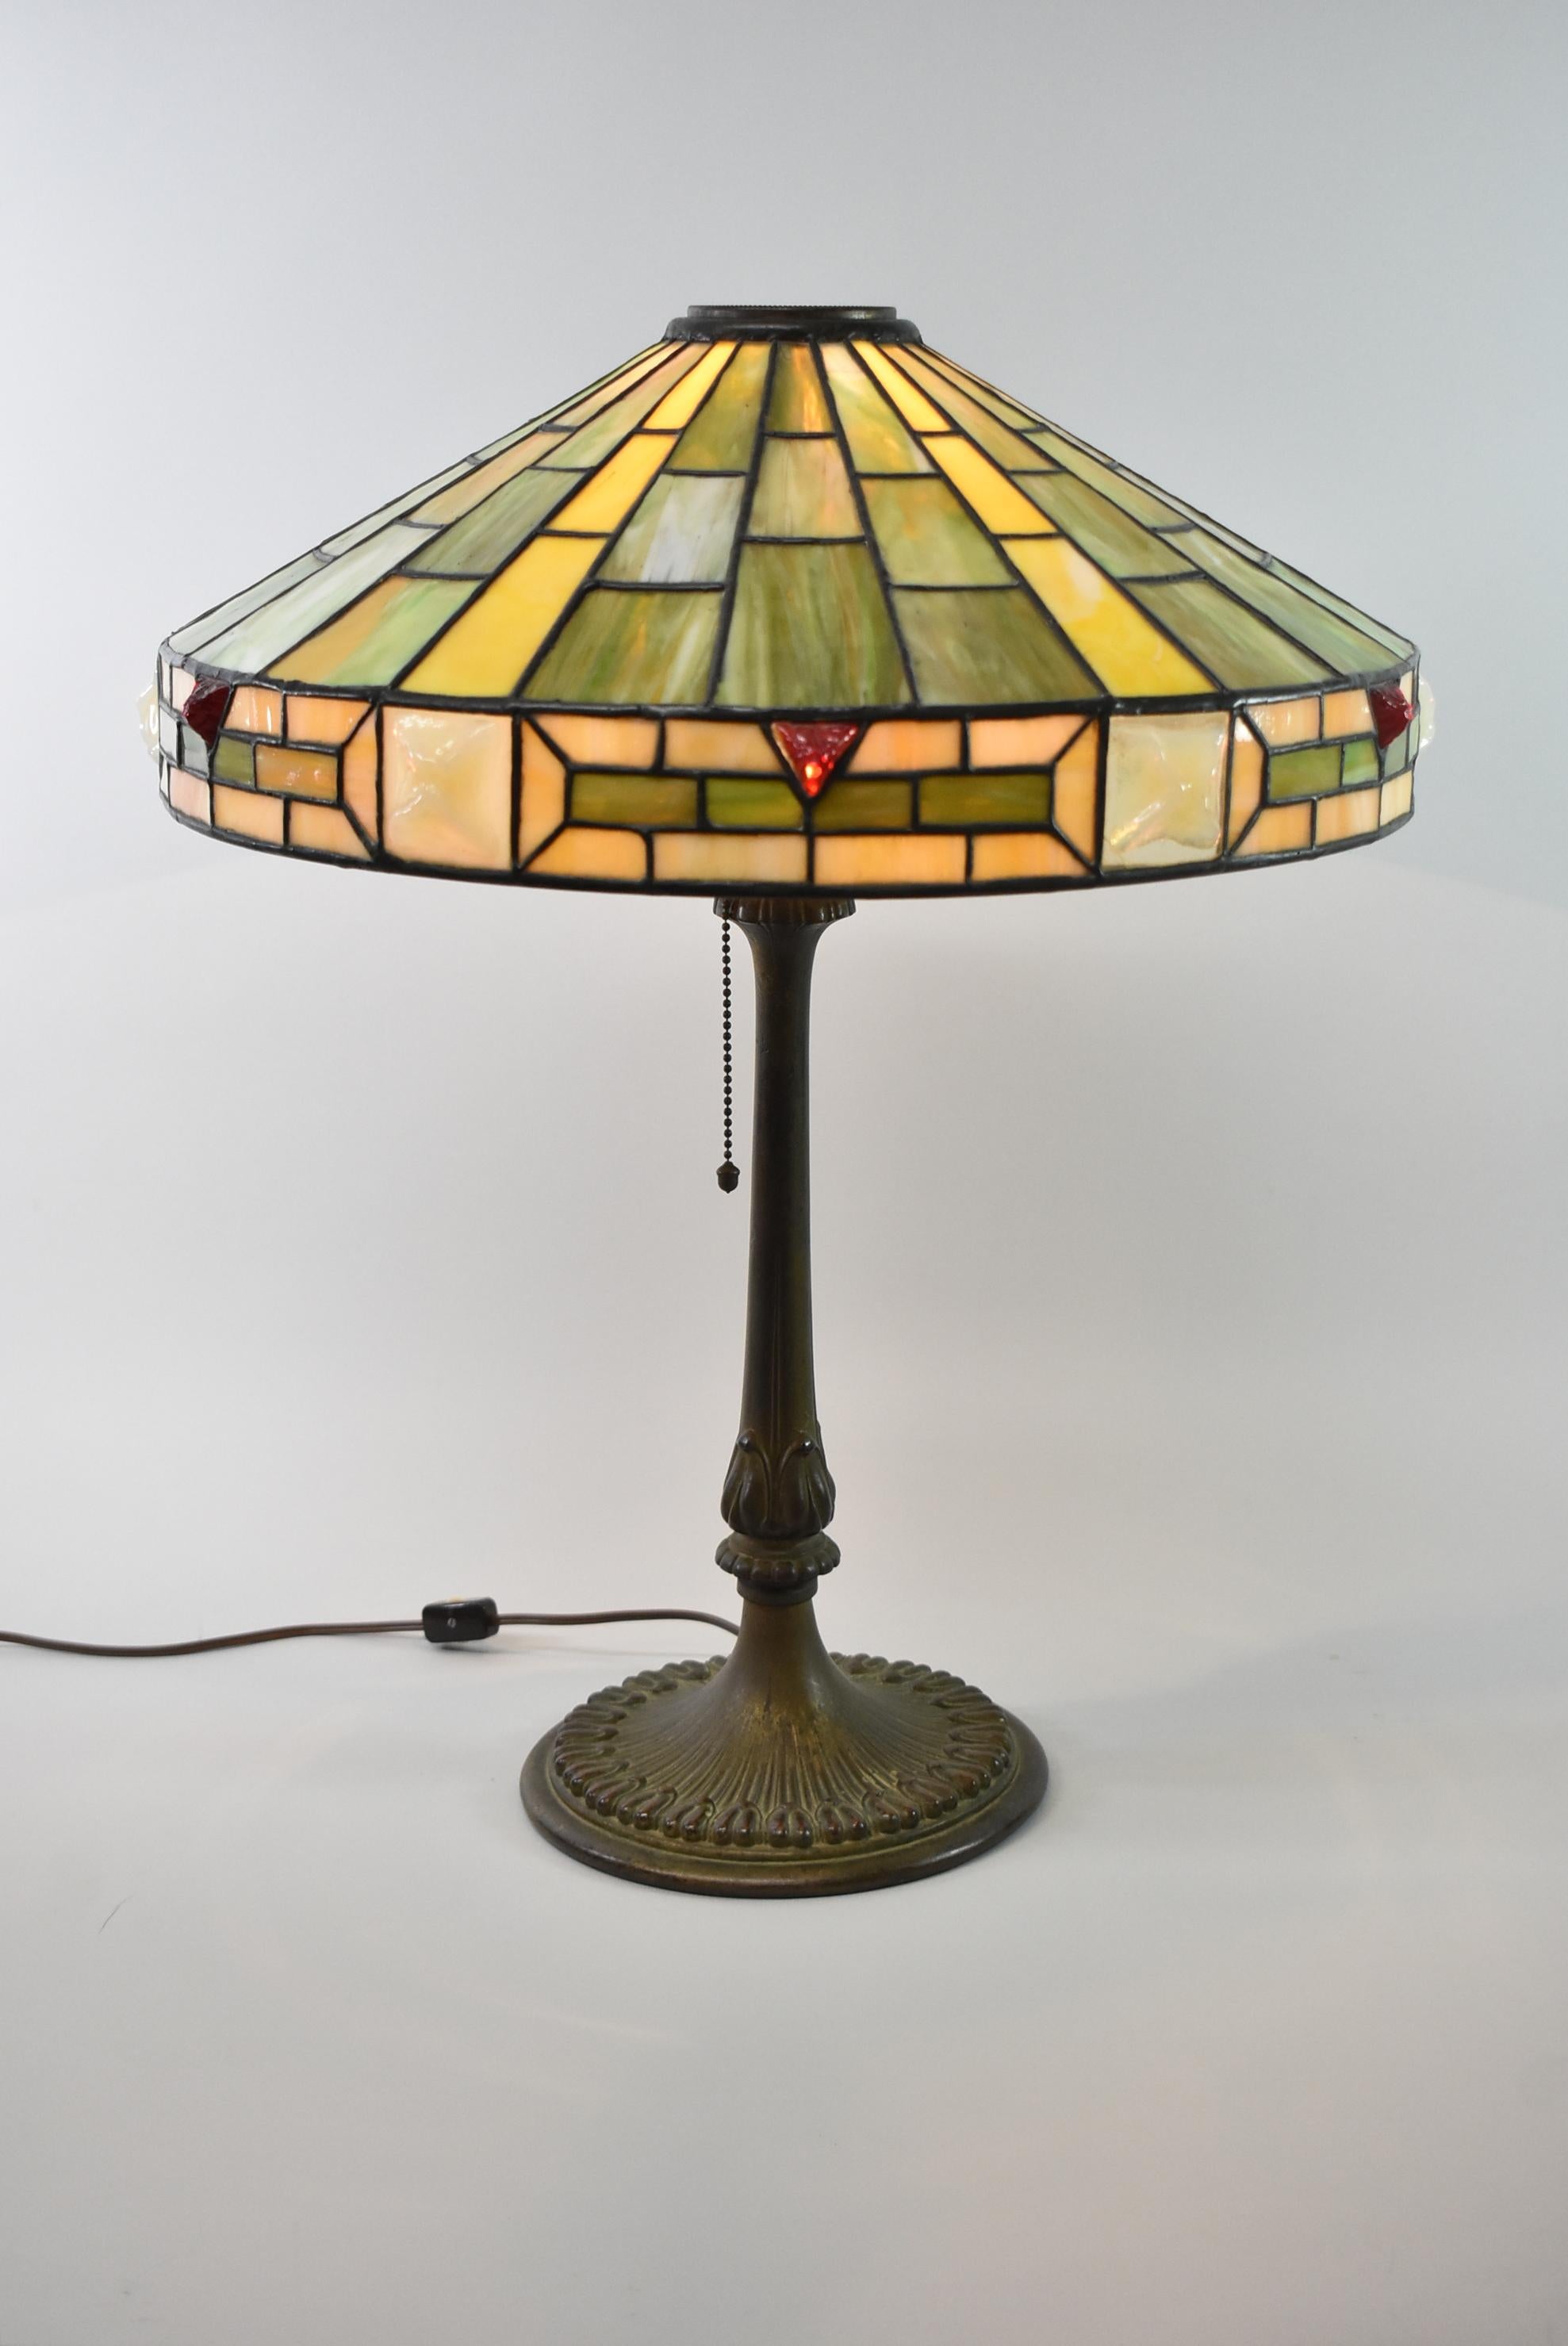 Wilkinson Arts & Crafts Leaded Glass Table Lamp In Good Condition For Sale In Toledo, OH